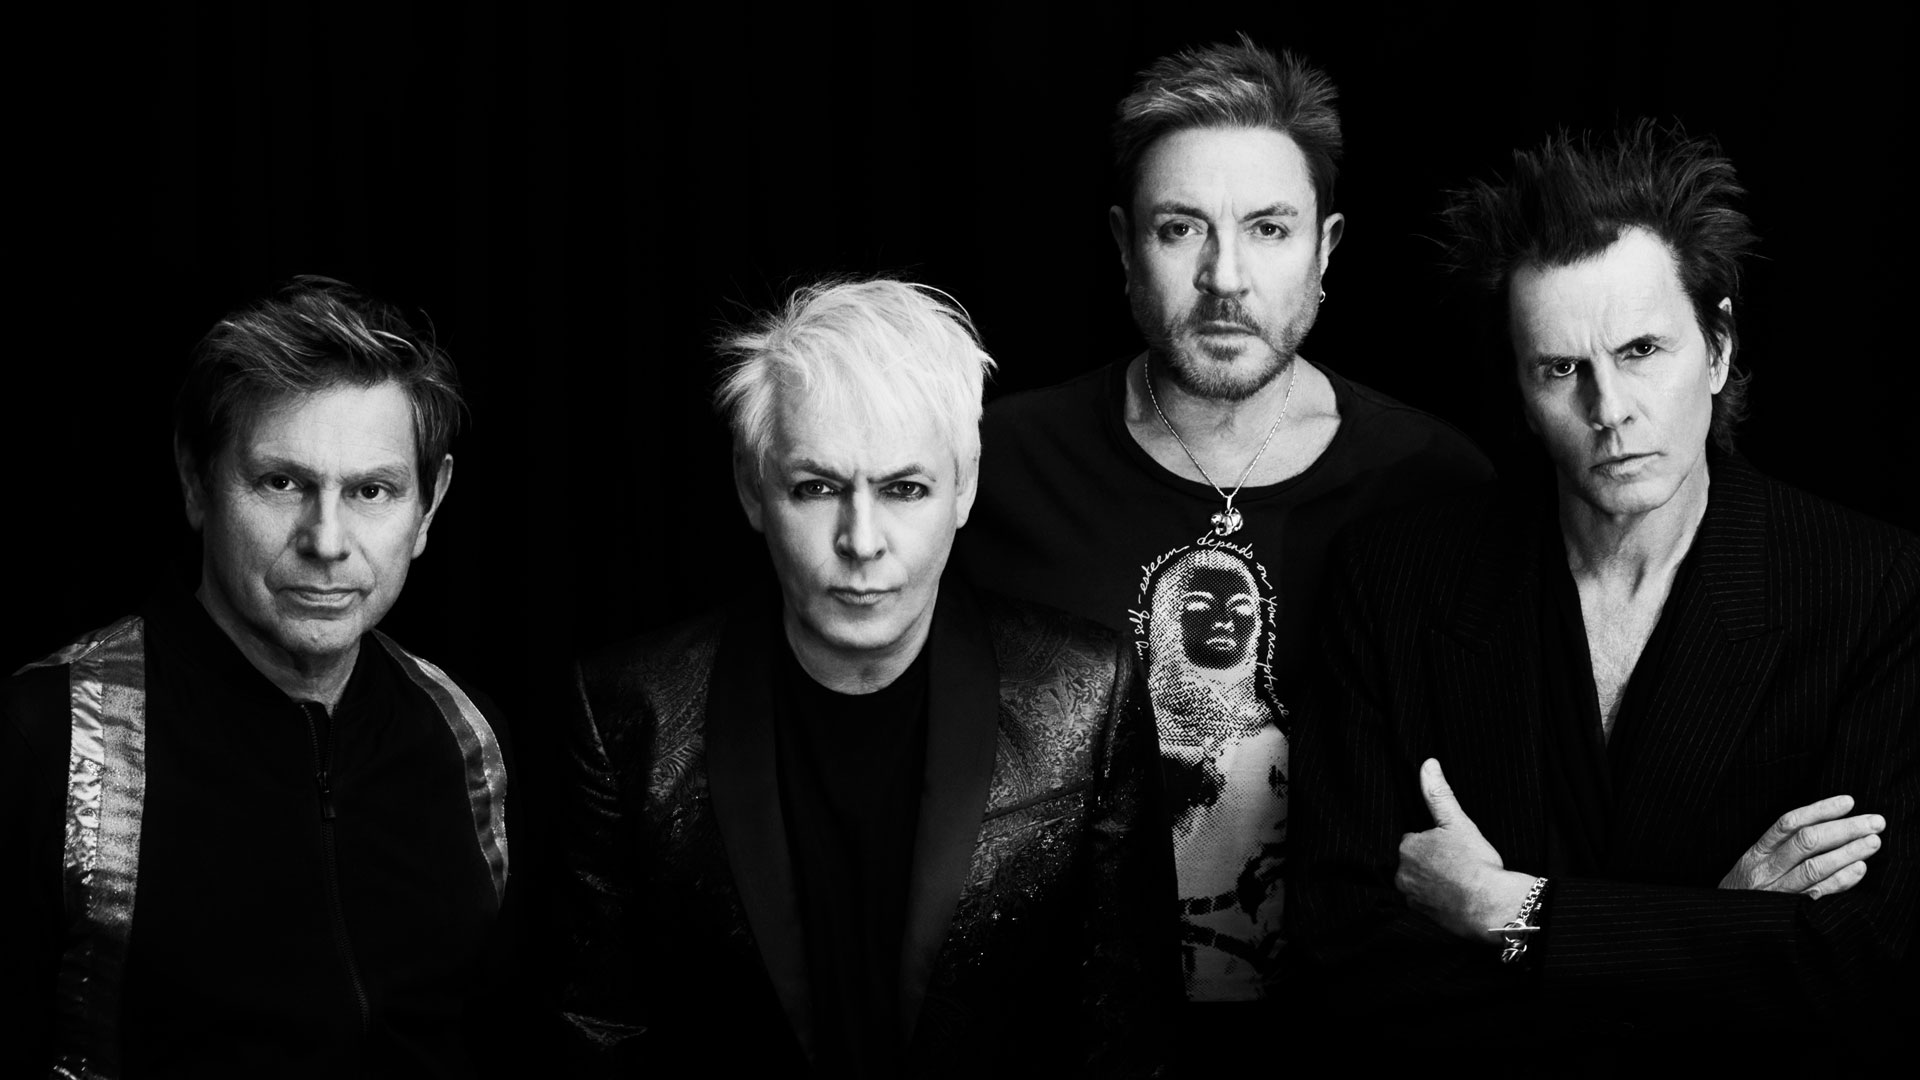 Duran Duran in spooky black and white for Halloween